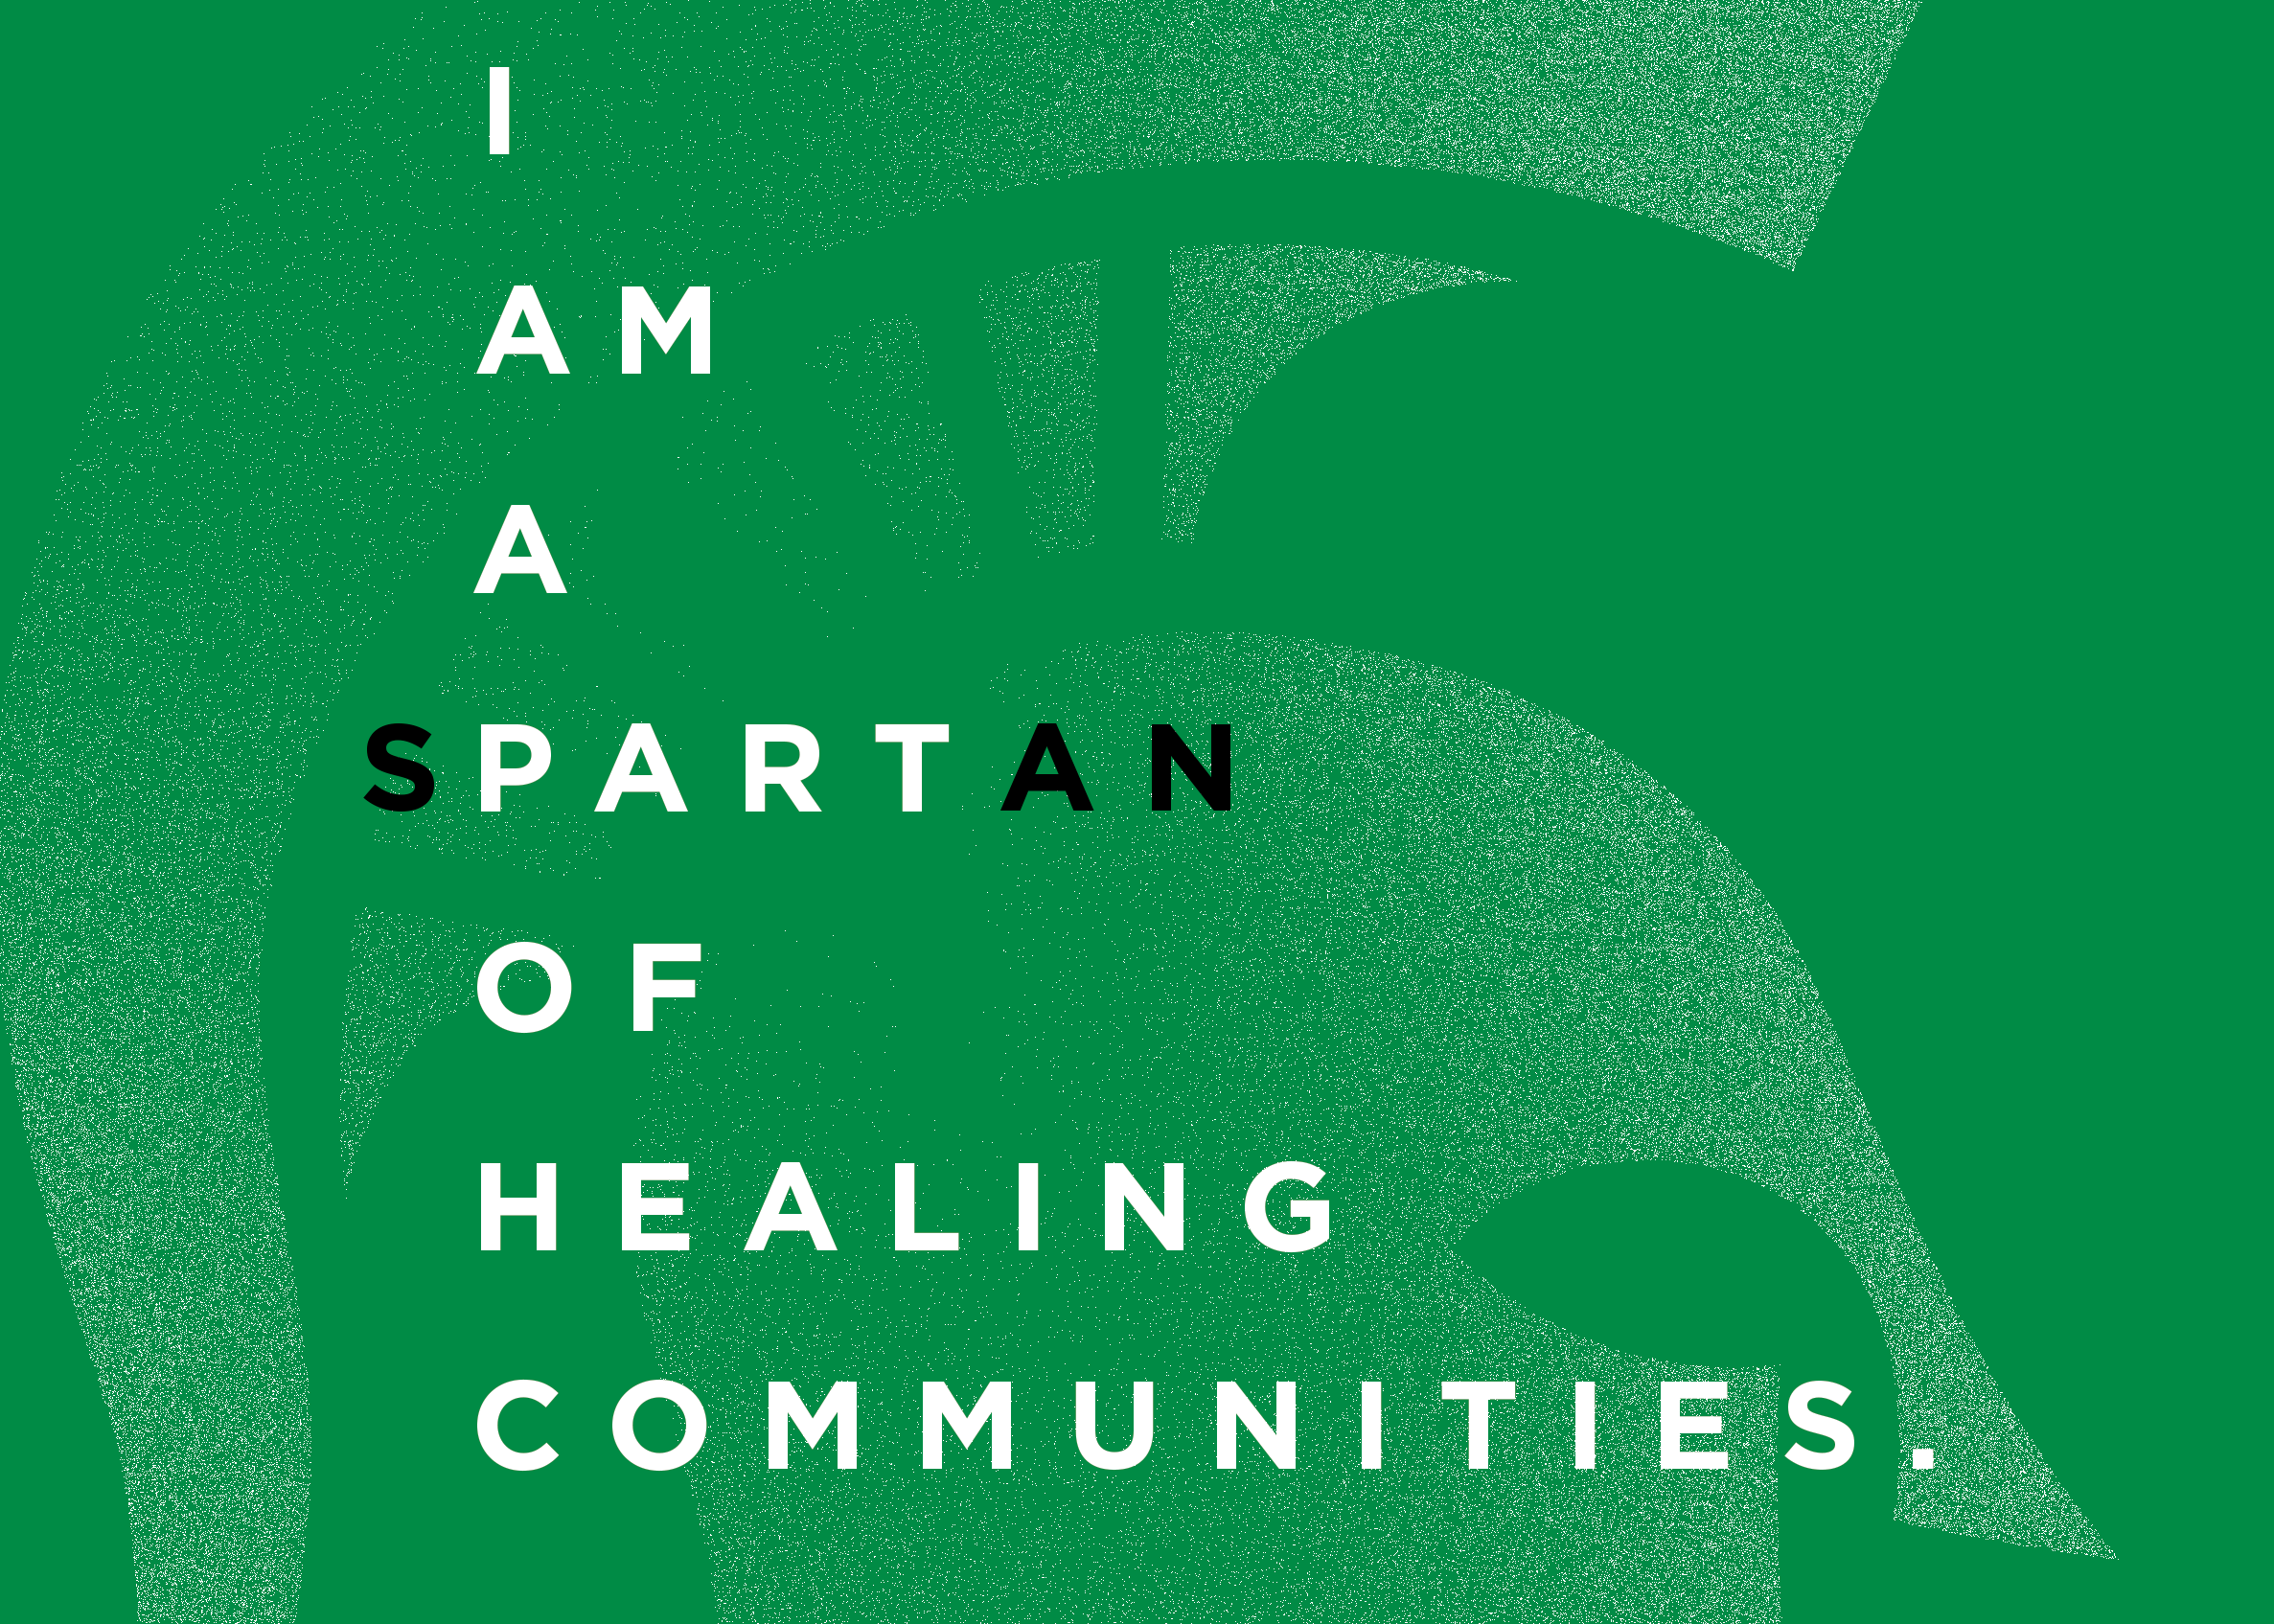 A graphical illustration in bright green that has text overlaying a faded MSU Spartan helmet. The text has two meanings. The first lists "I AM A PART OF HEALING COMMUNITIES." The second meaning changes the word "PART" to "SPARTAN".